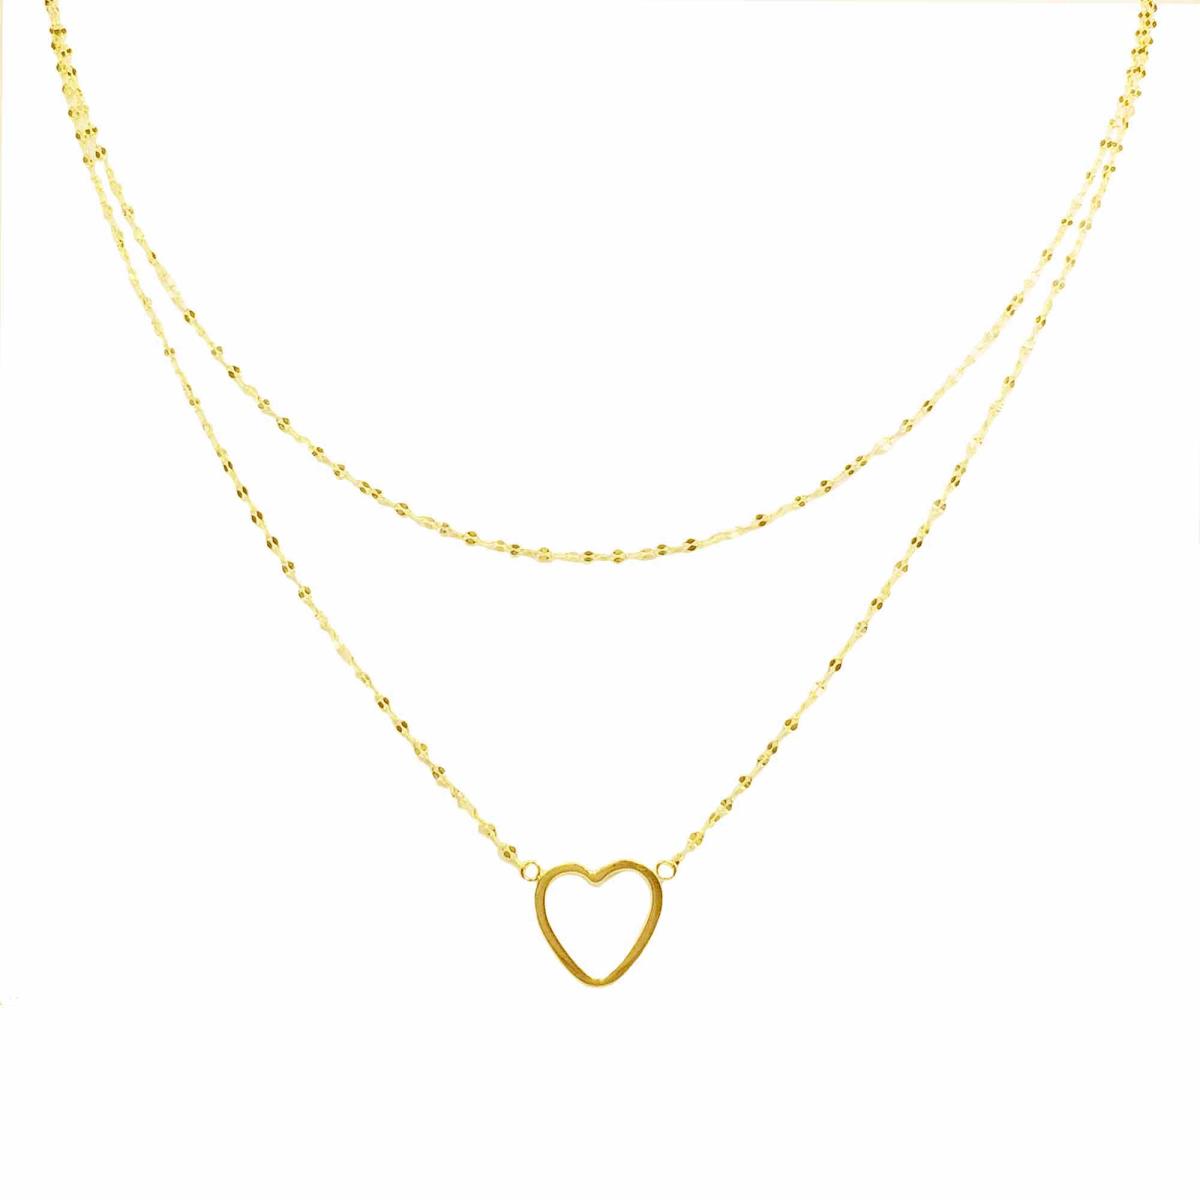 10K Yellow Gold DC Twist Polished Heart Double Layered 16"-18" Necklace